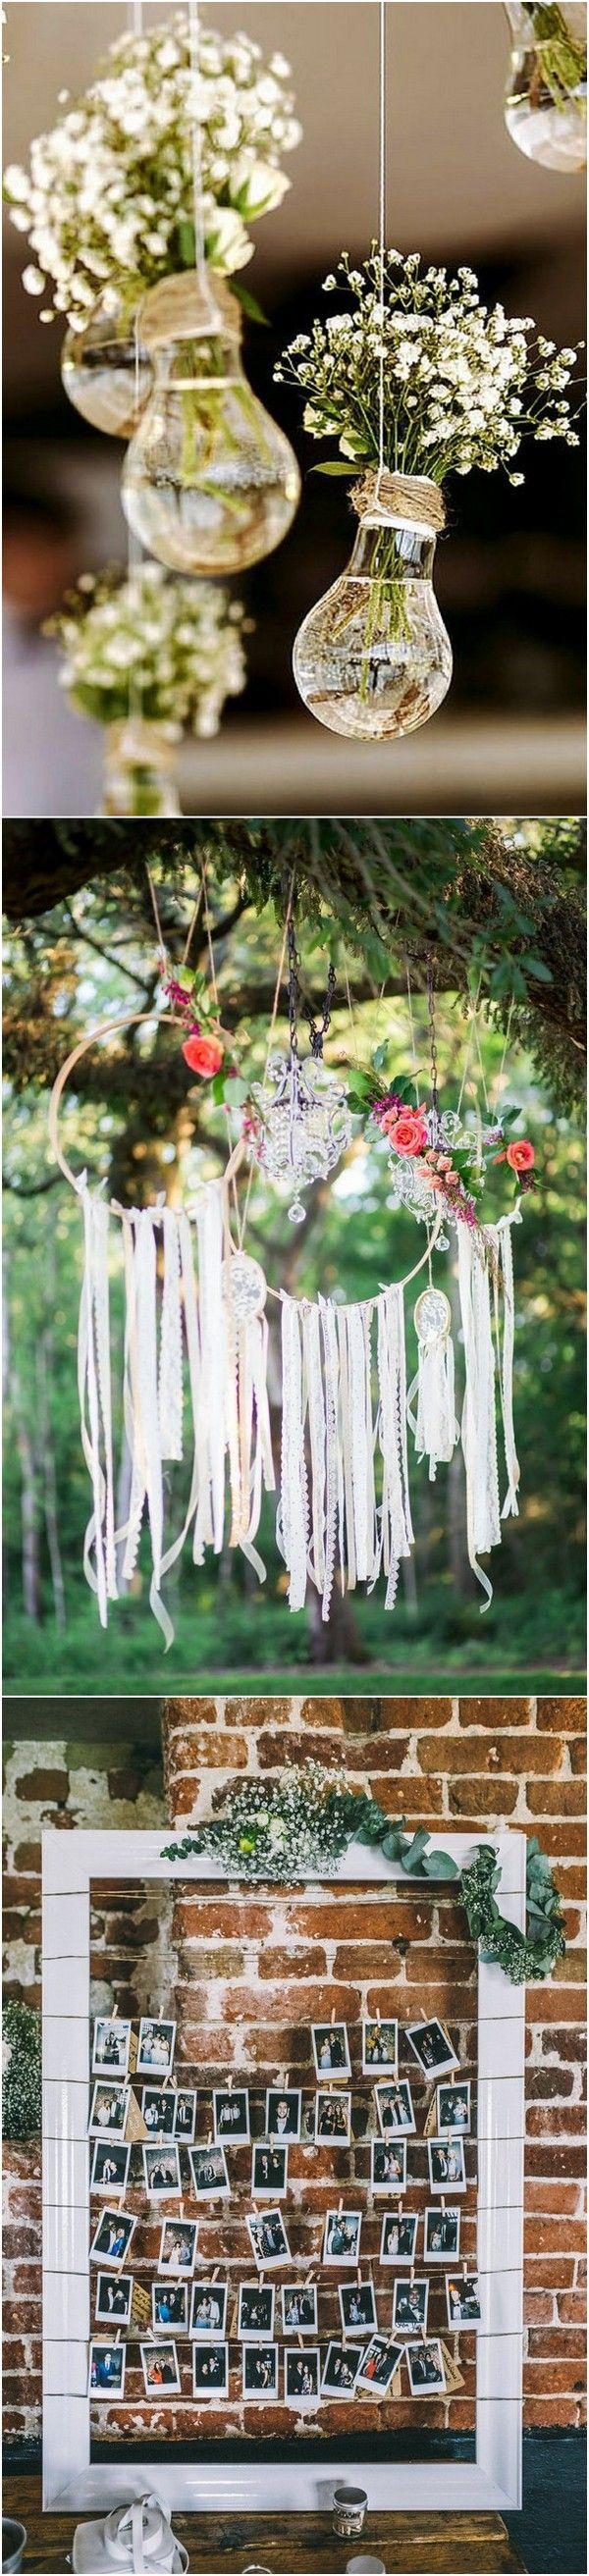 Wedding - Trending-30 Boho Chic Wedding Ideas For 2018 - Page 3 Of 3